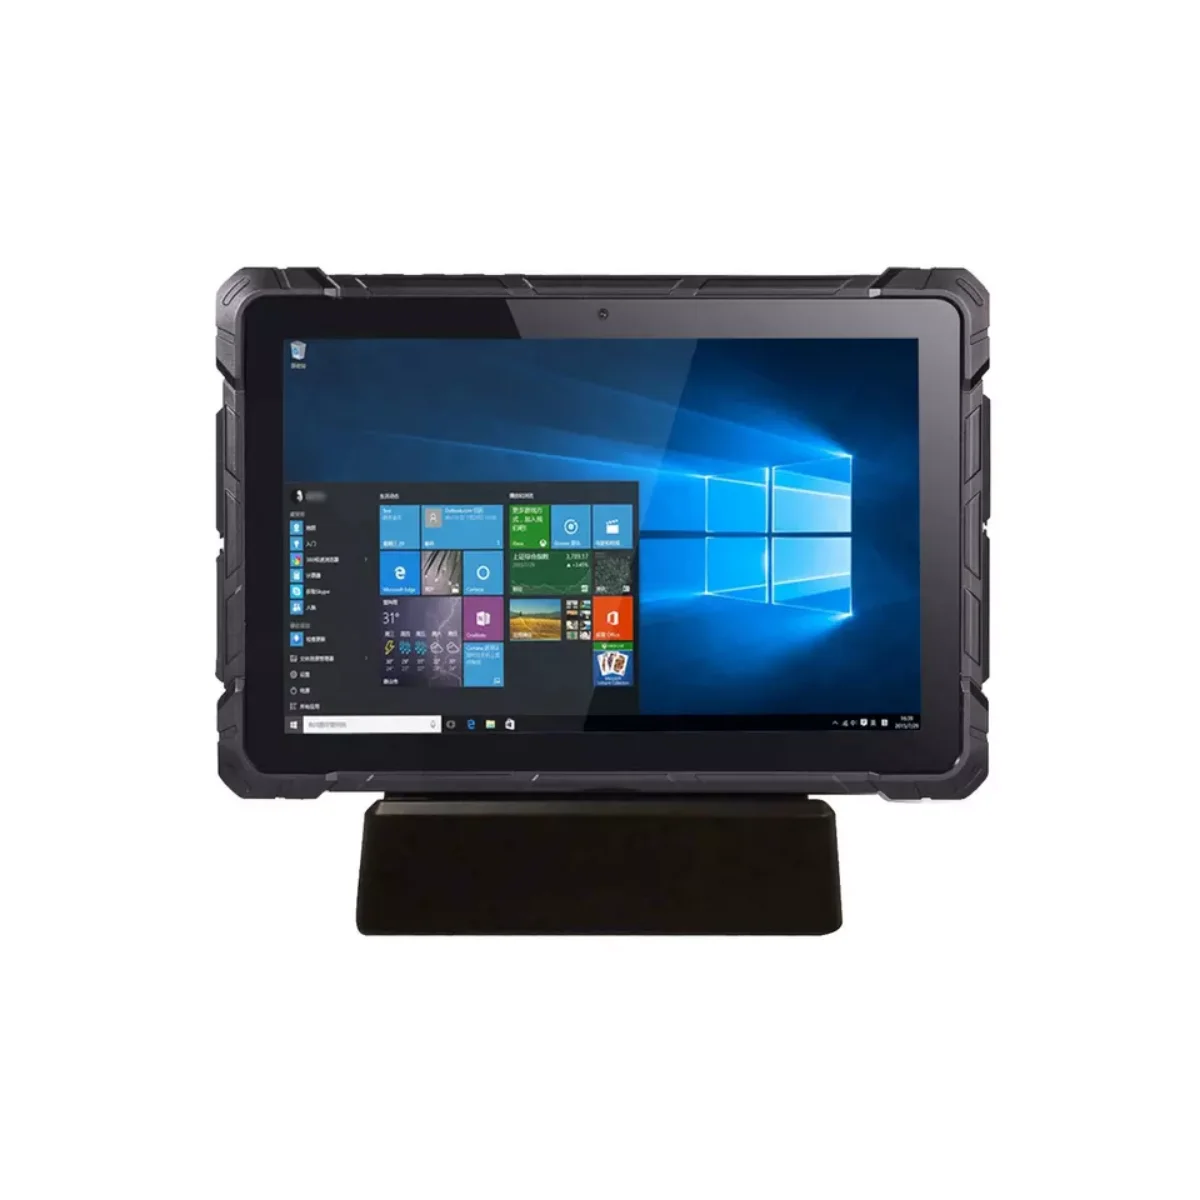 Gole 10 1 Inch Windows10 Waterproof Drop Proof Ip67 Touch Screen Industrial Rugged Tablet Pc Buy Nfc Gps 10inch Rugged Tablet Pc Qr Code Scanner Industrial Tablet Pc 4g Lte Rs232 Rj45 Touch Screen